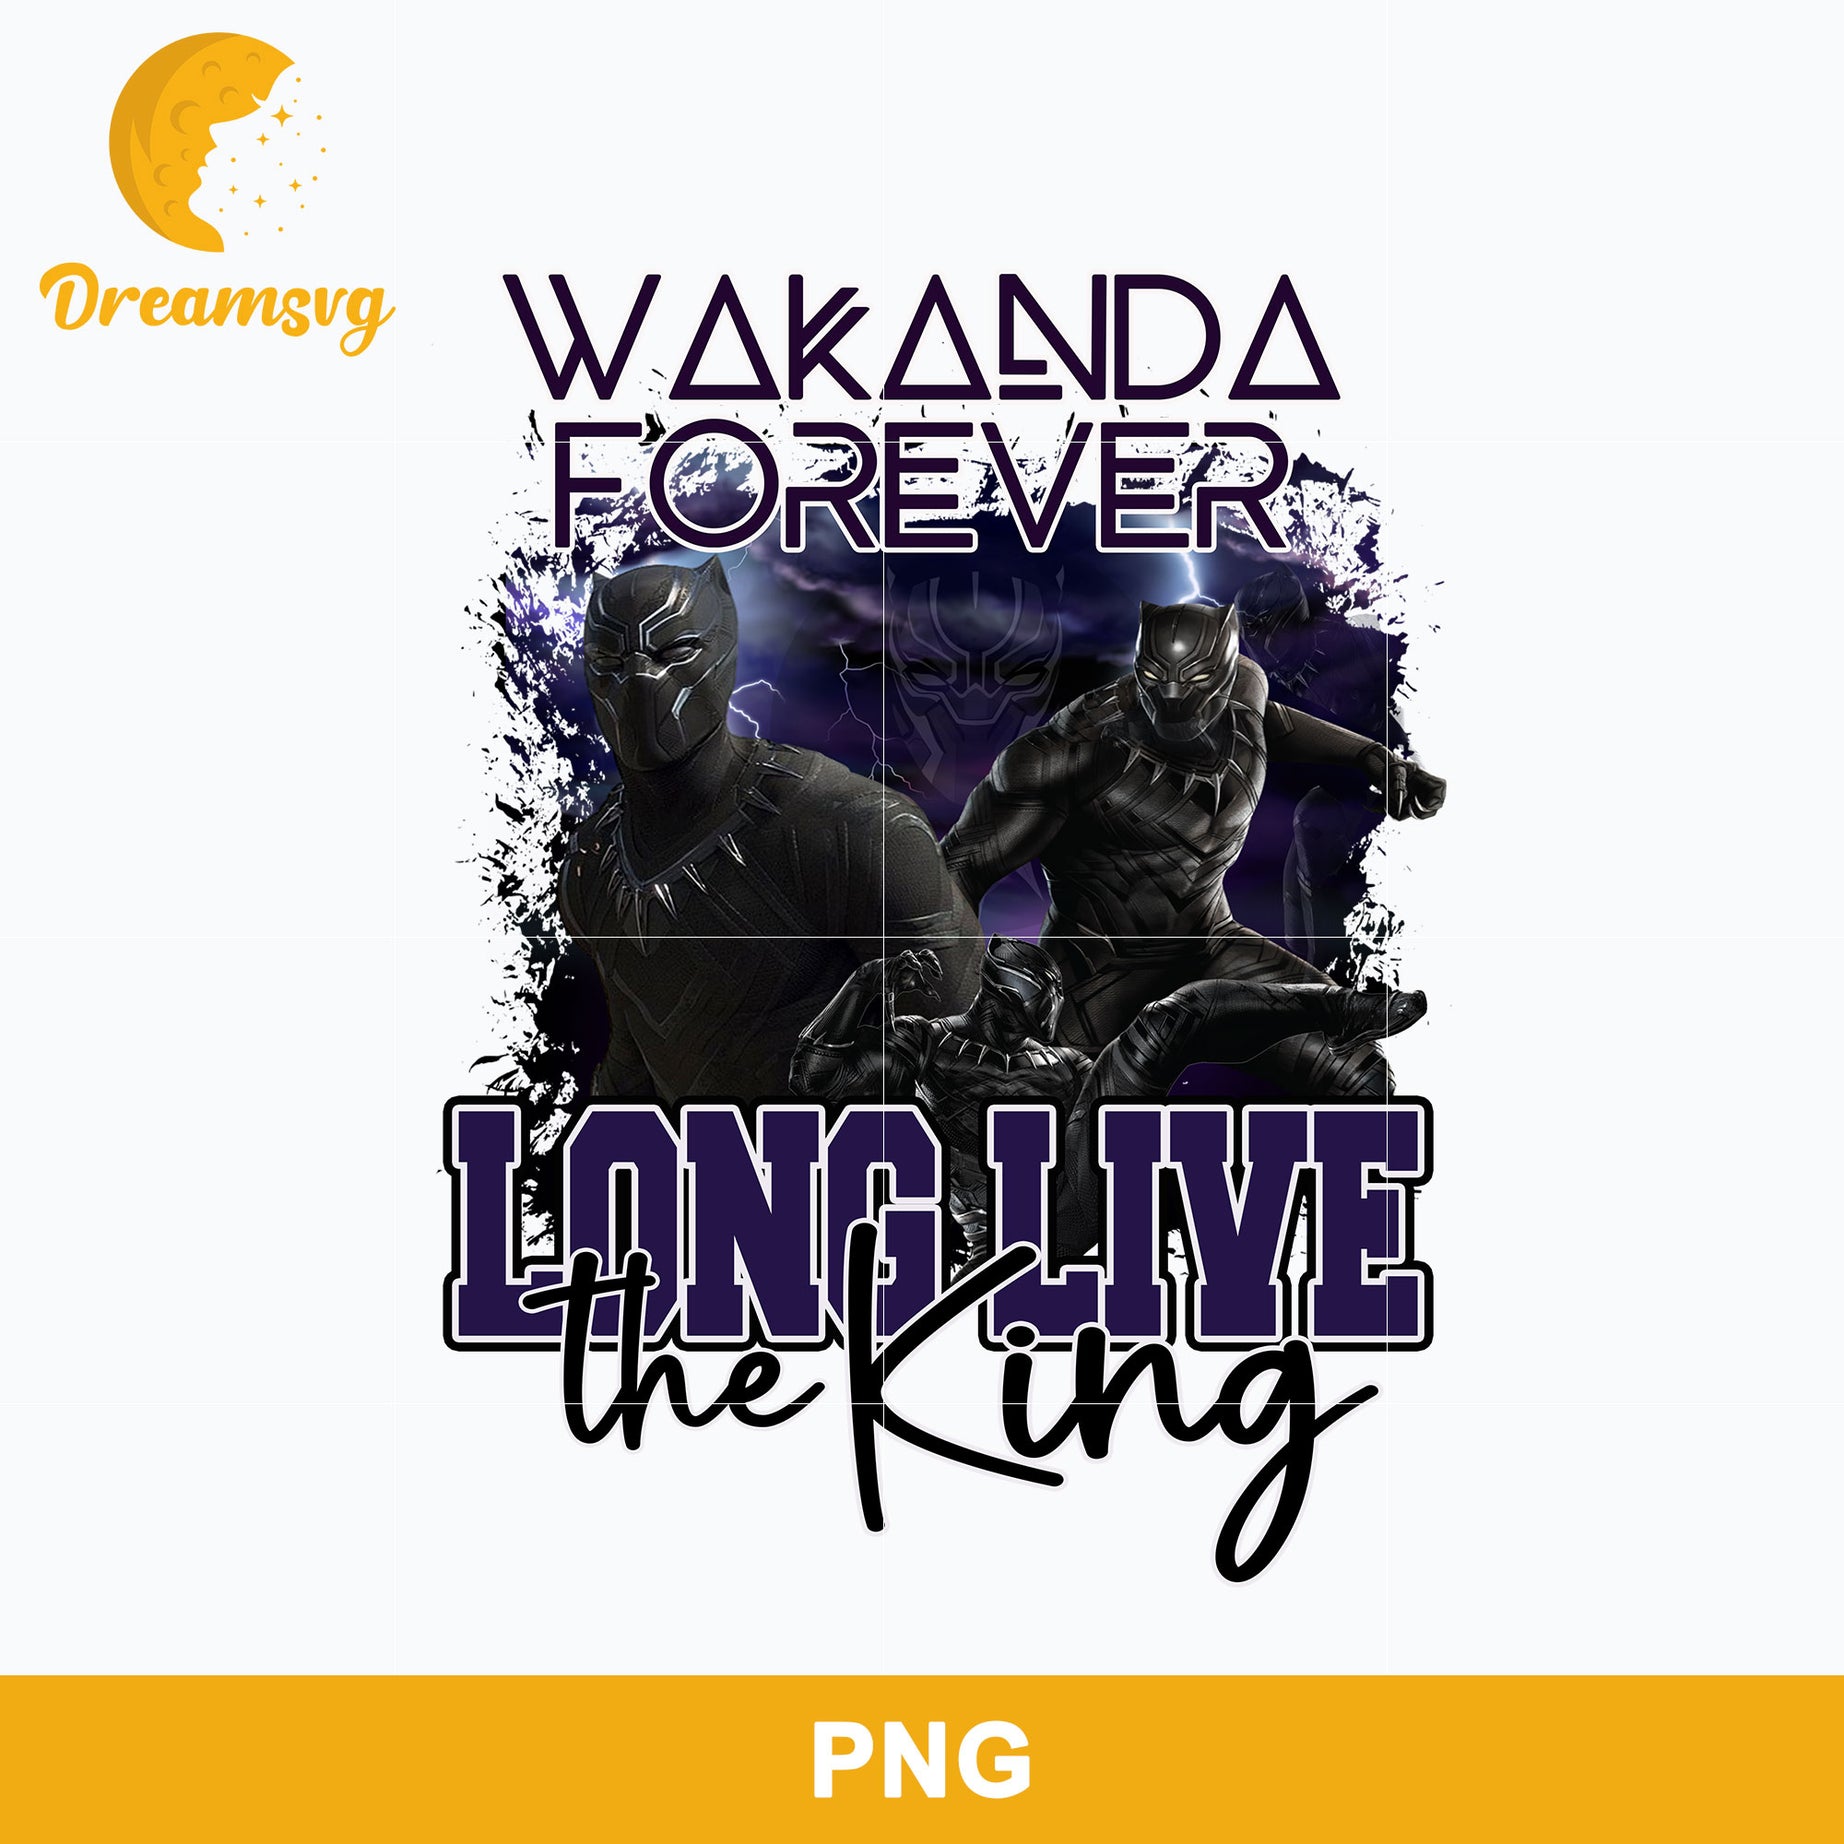 Black Panther Wakanda Forever PNG, Wakanda Forever PNG, Marvel PNG